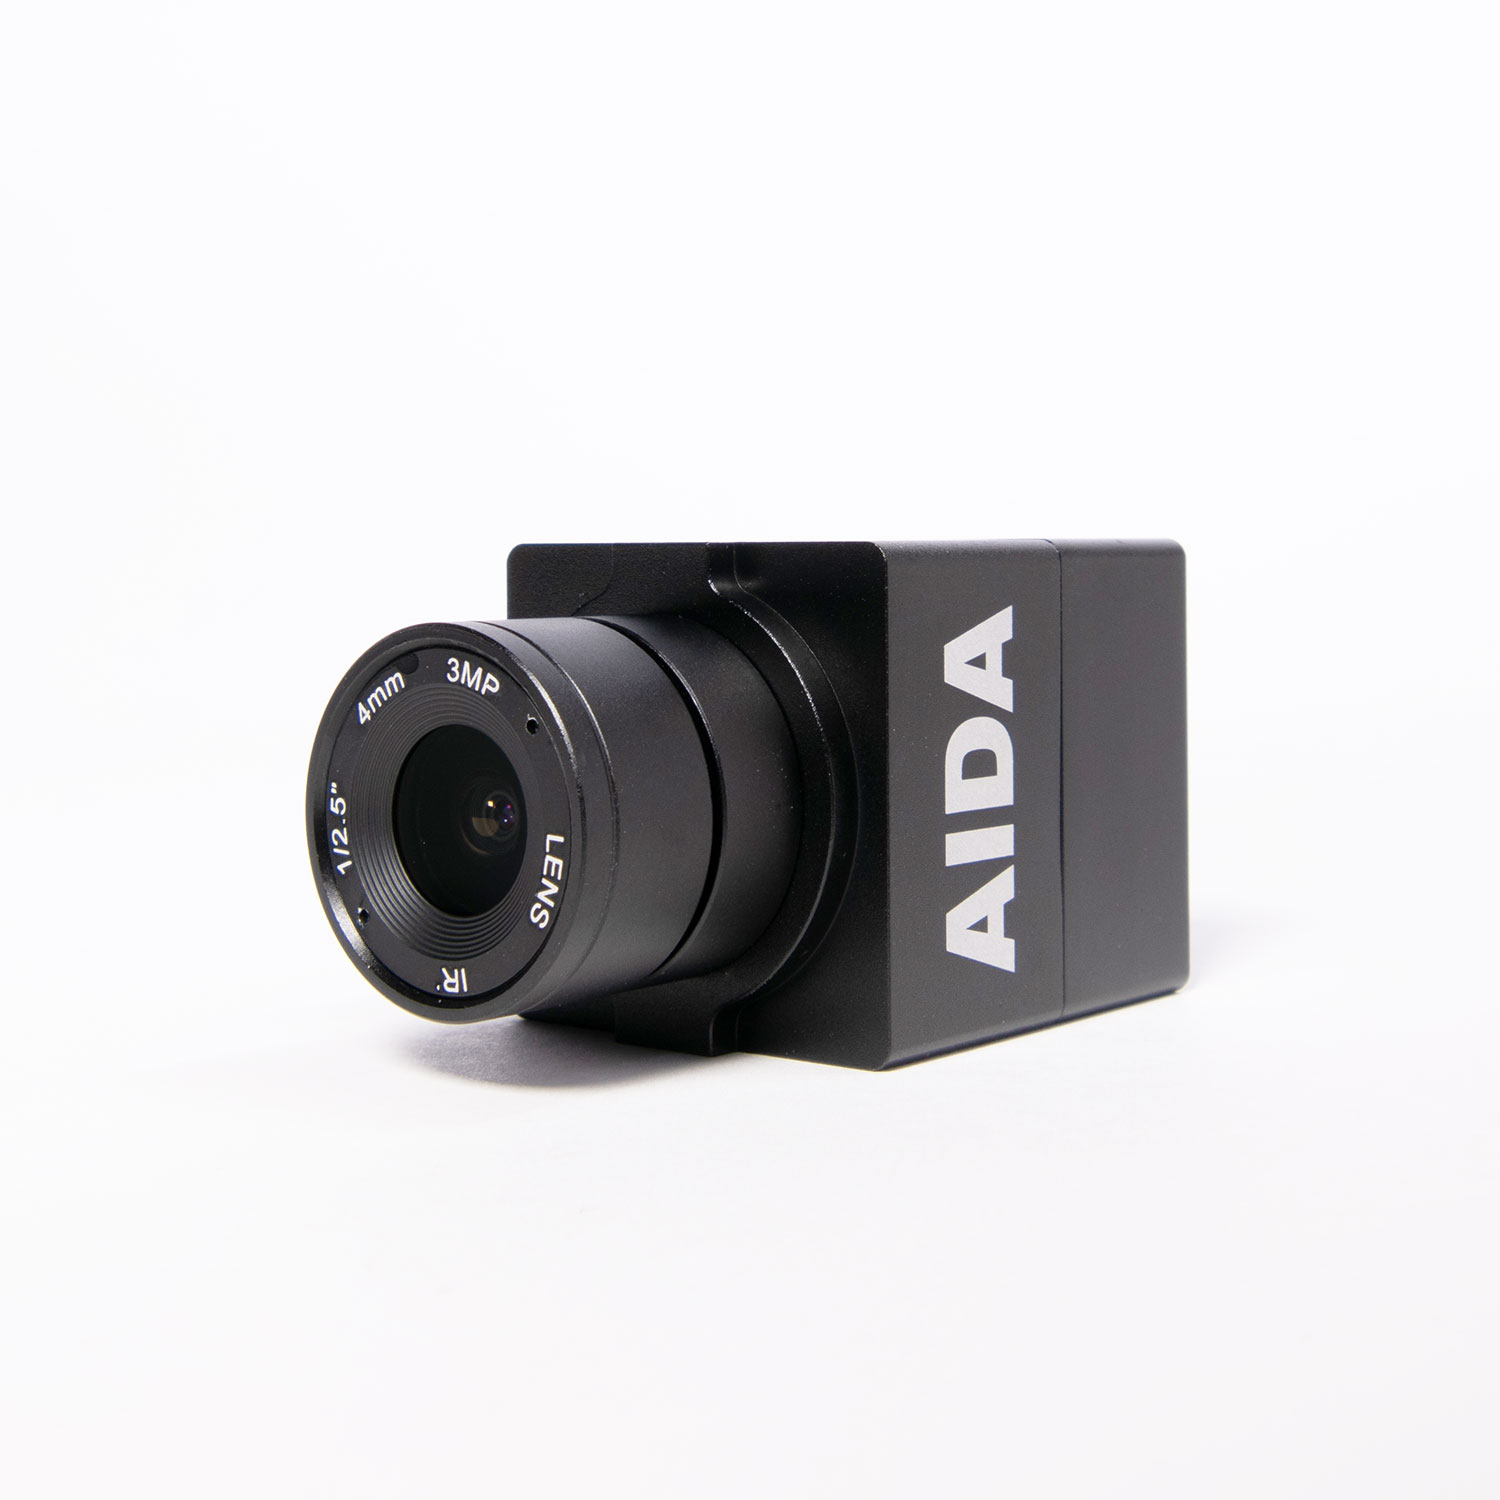 AIDA HD-100A Provides Fast and Flexible Video Conferencing in Canberra